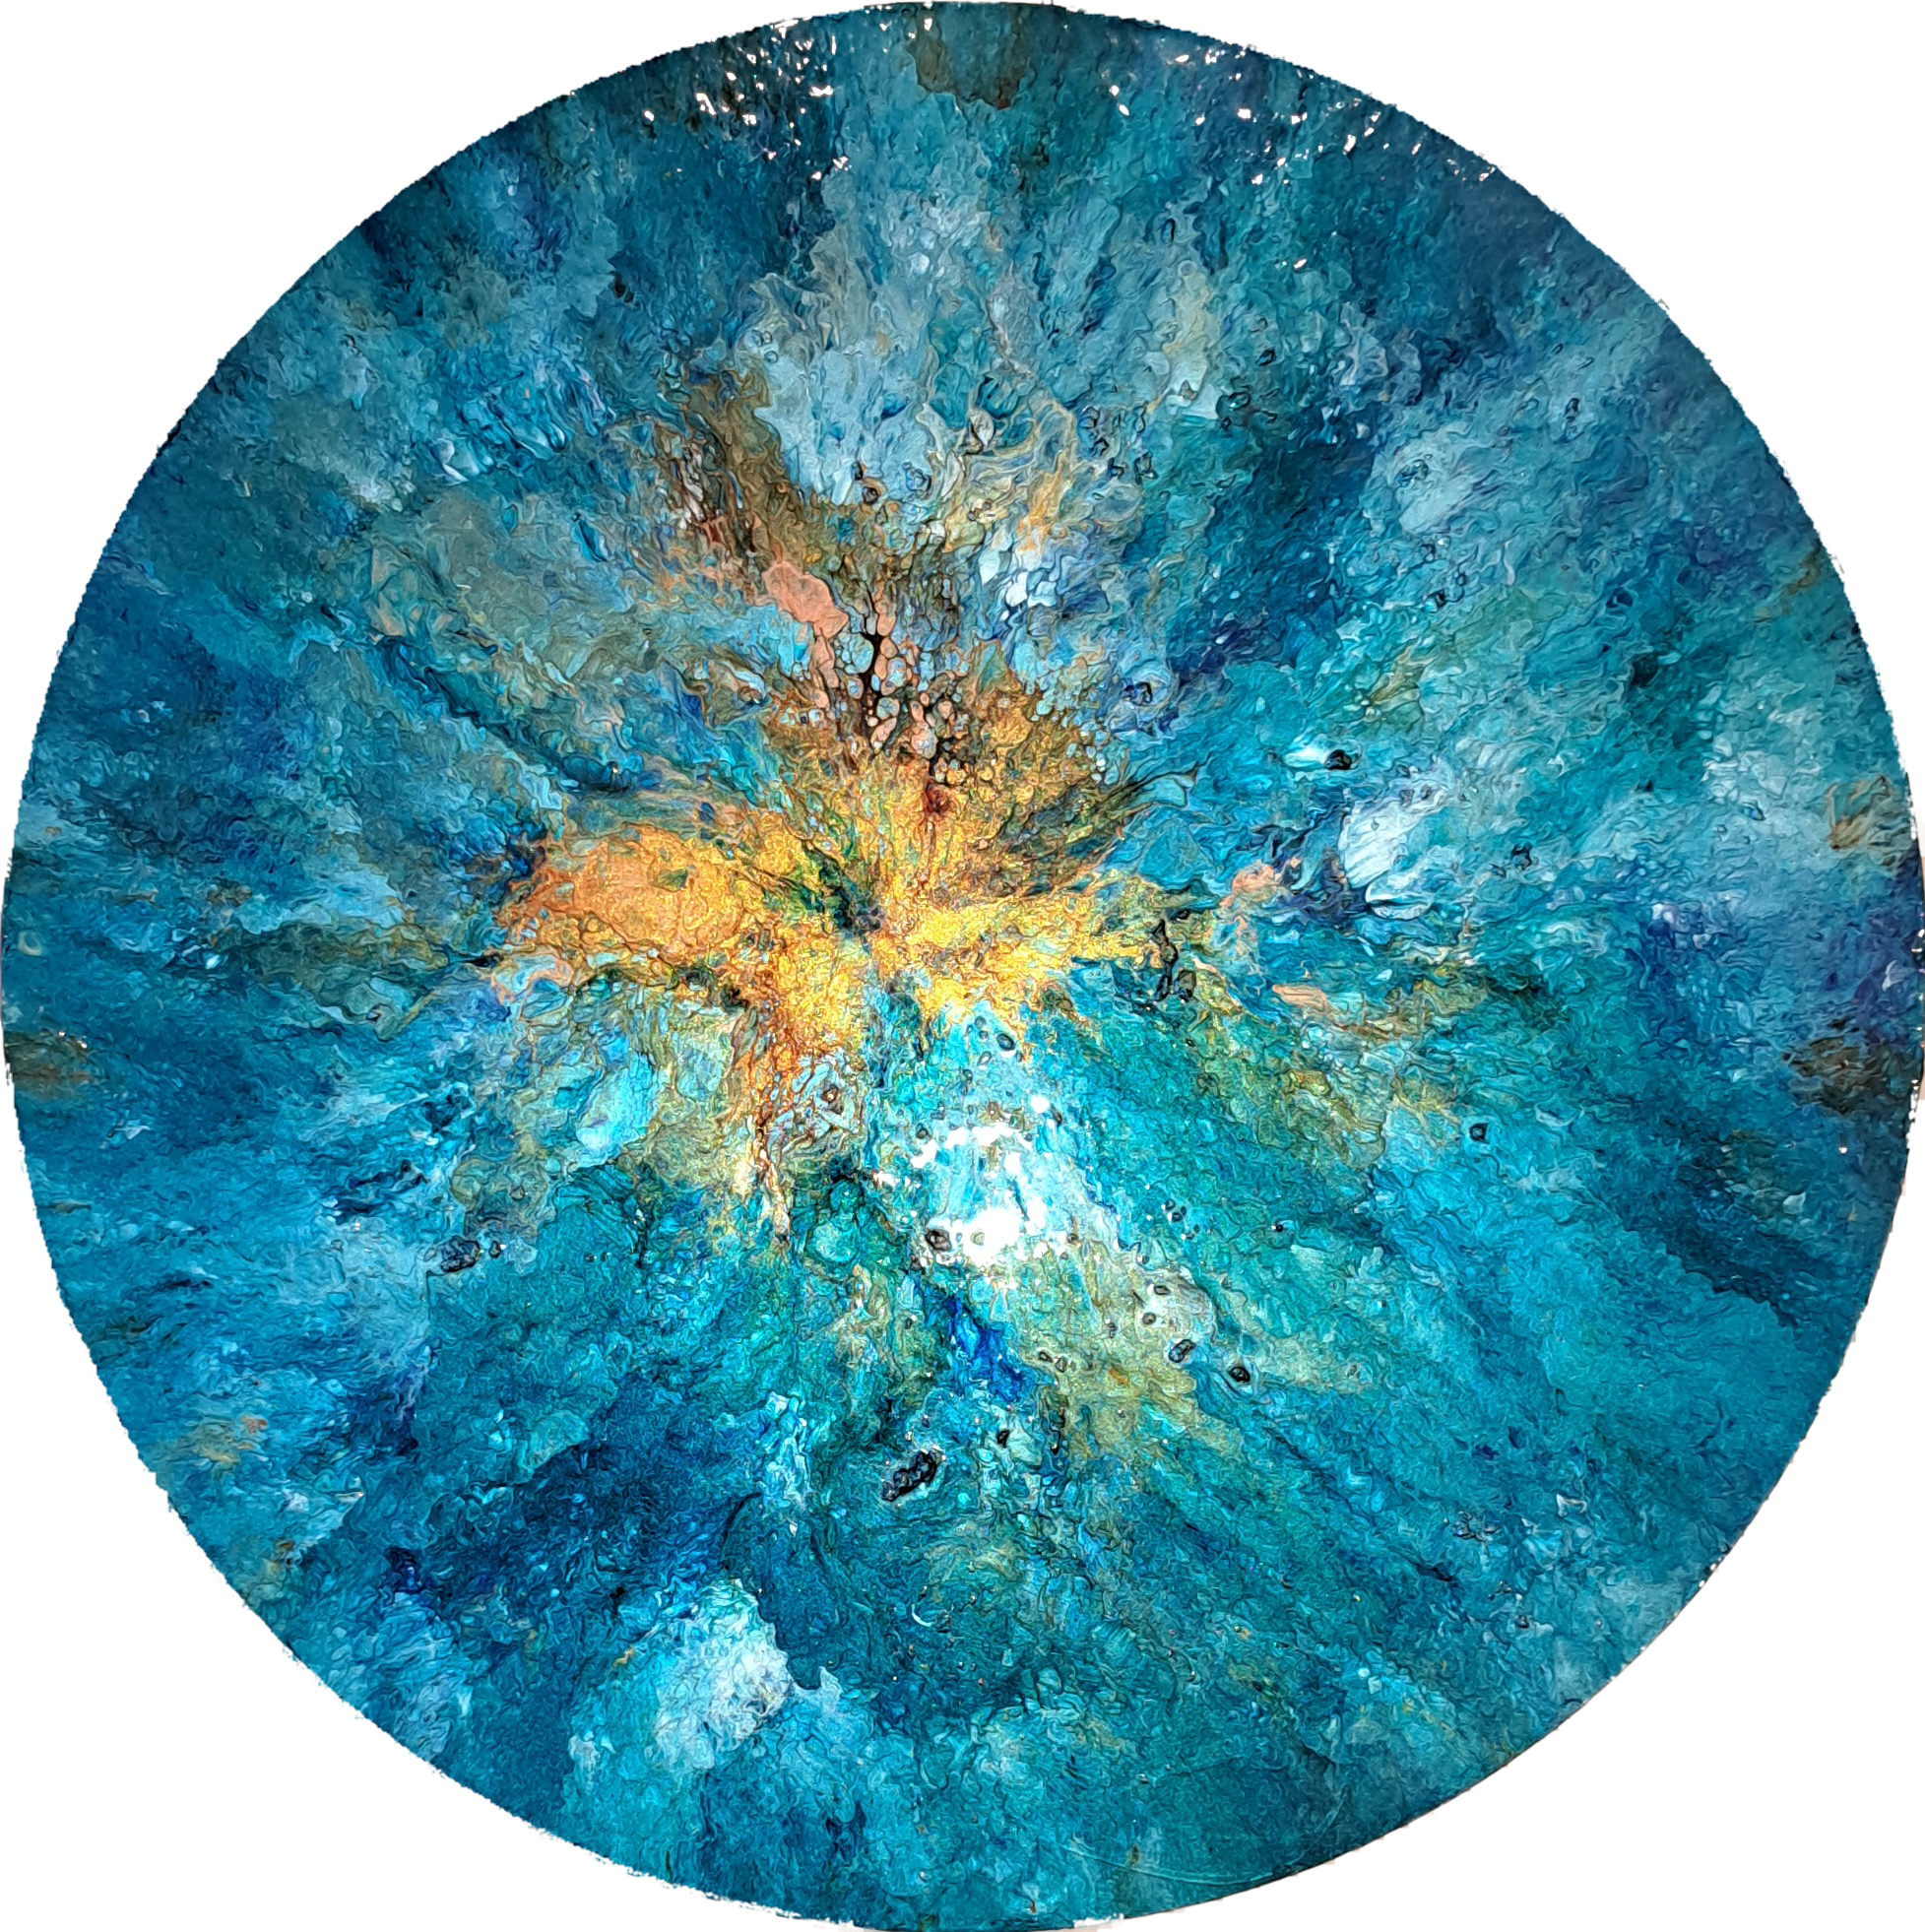 Claire Woolhead Aurelia Ocean round painting teal blue and gold metallic glittery painting on circular metal sheet in modern contemporary abstract style